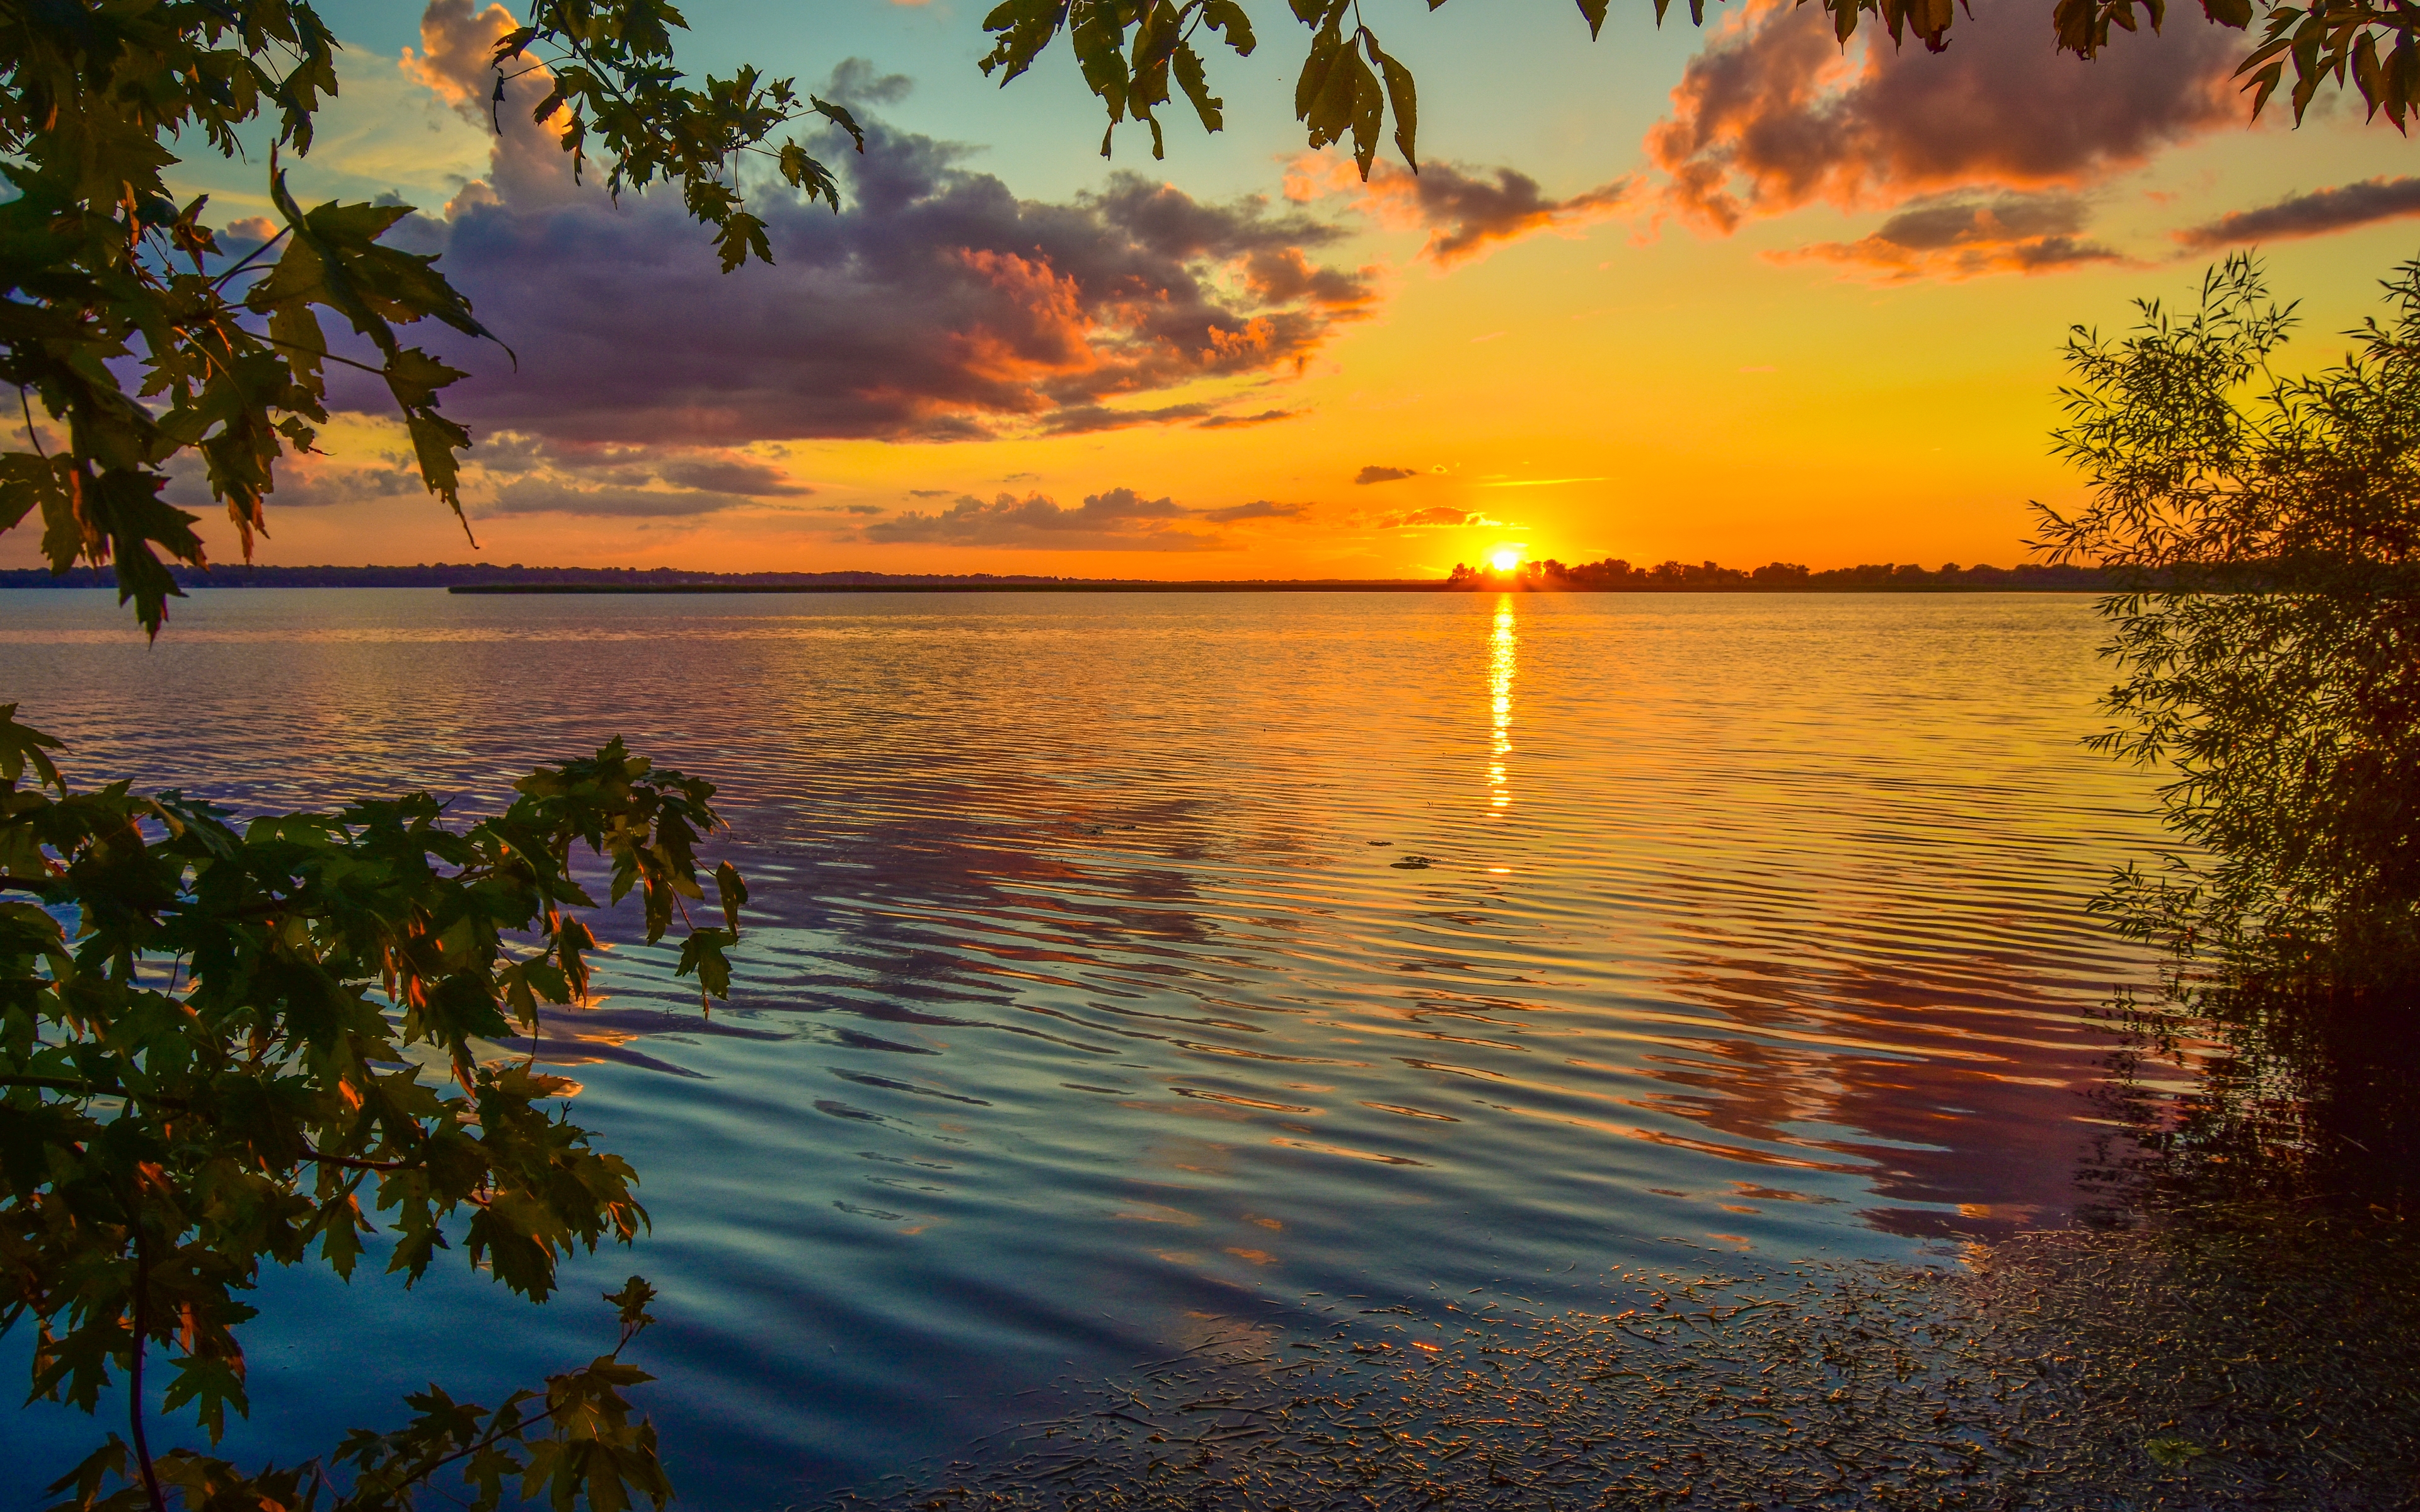 Image: Lake, water, waves, reflection, sunset, sun, trees, leaves, sky, clouds, summer